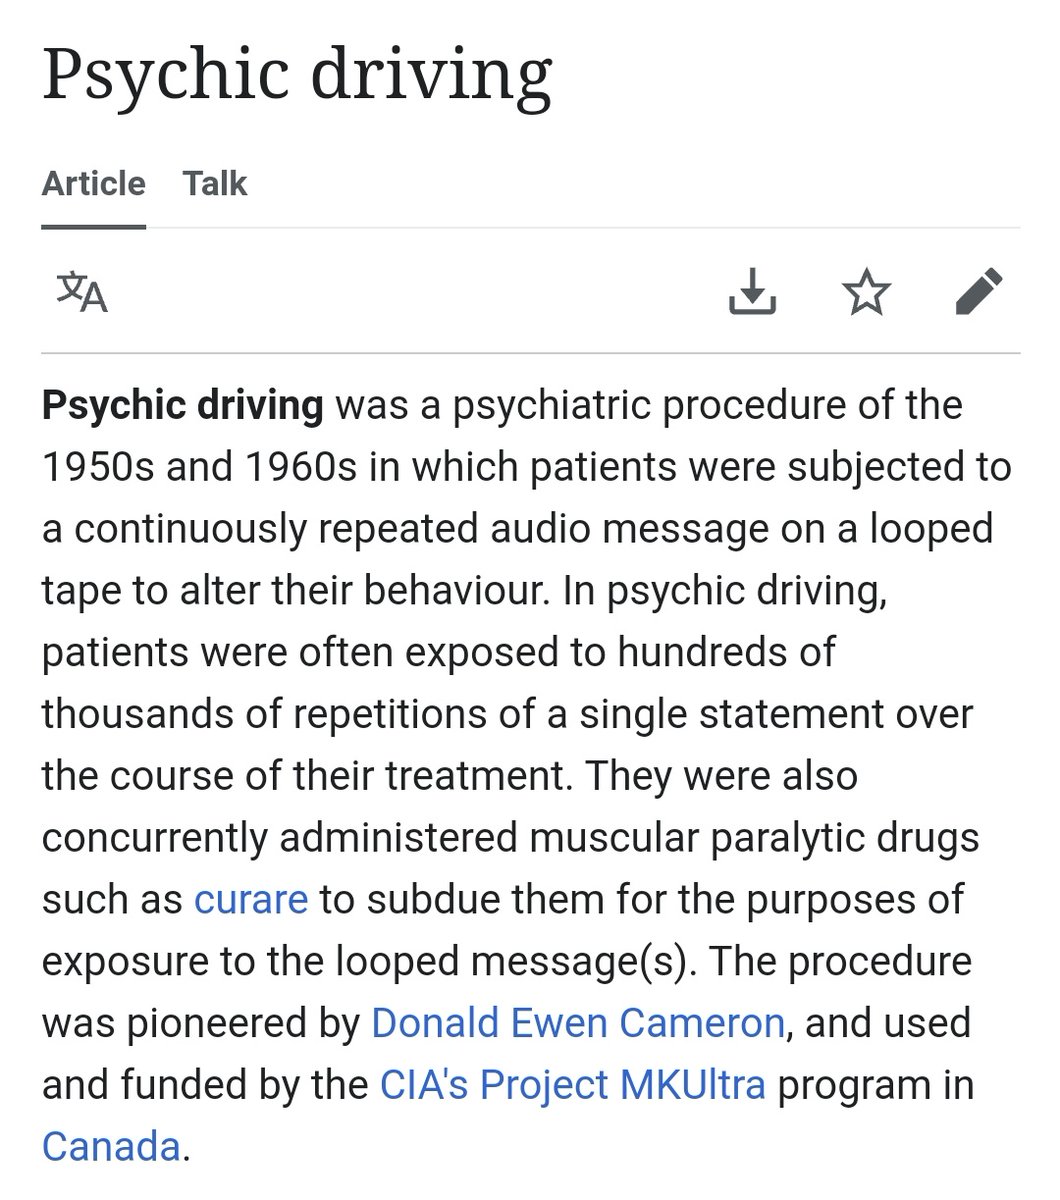 Have you considered that the #PsychicDriving of #MKultra experiments no longer requires your presence to achieve?
#V2K
#VoiceOfGod
#5G
#PsychicDriving 
#MKultra 
#PsychotronicWeapons
#CrowdControl
#BlueBeam
#CrimesAgainstHumanity 

x.com/battleofever/s…